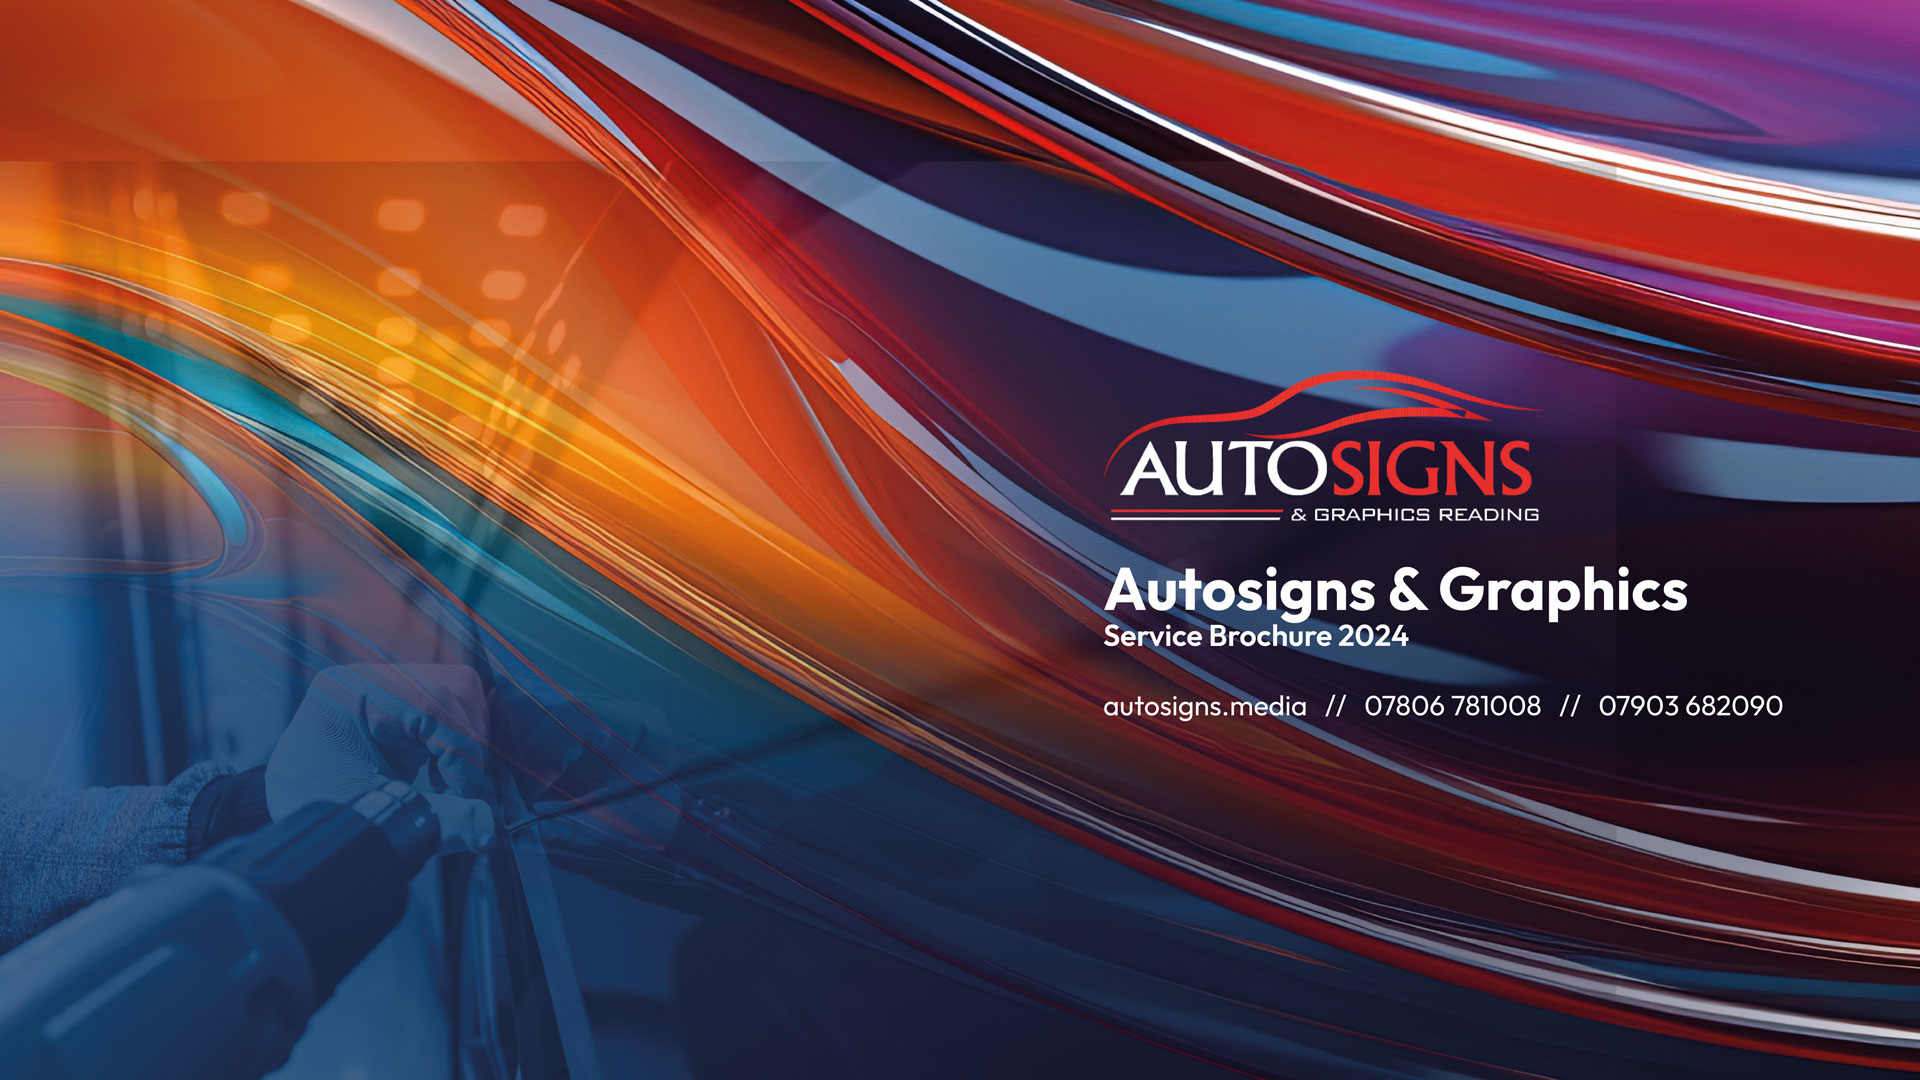 The front cover that I designed in Photoshop for Autosigns